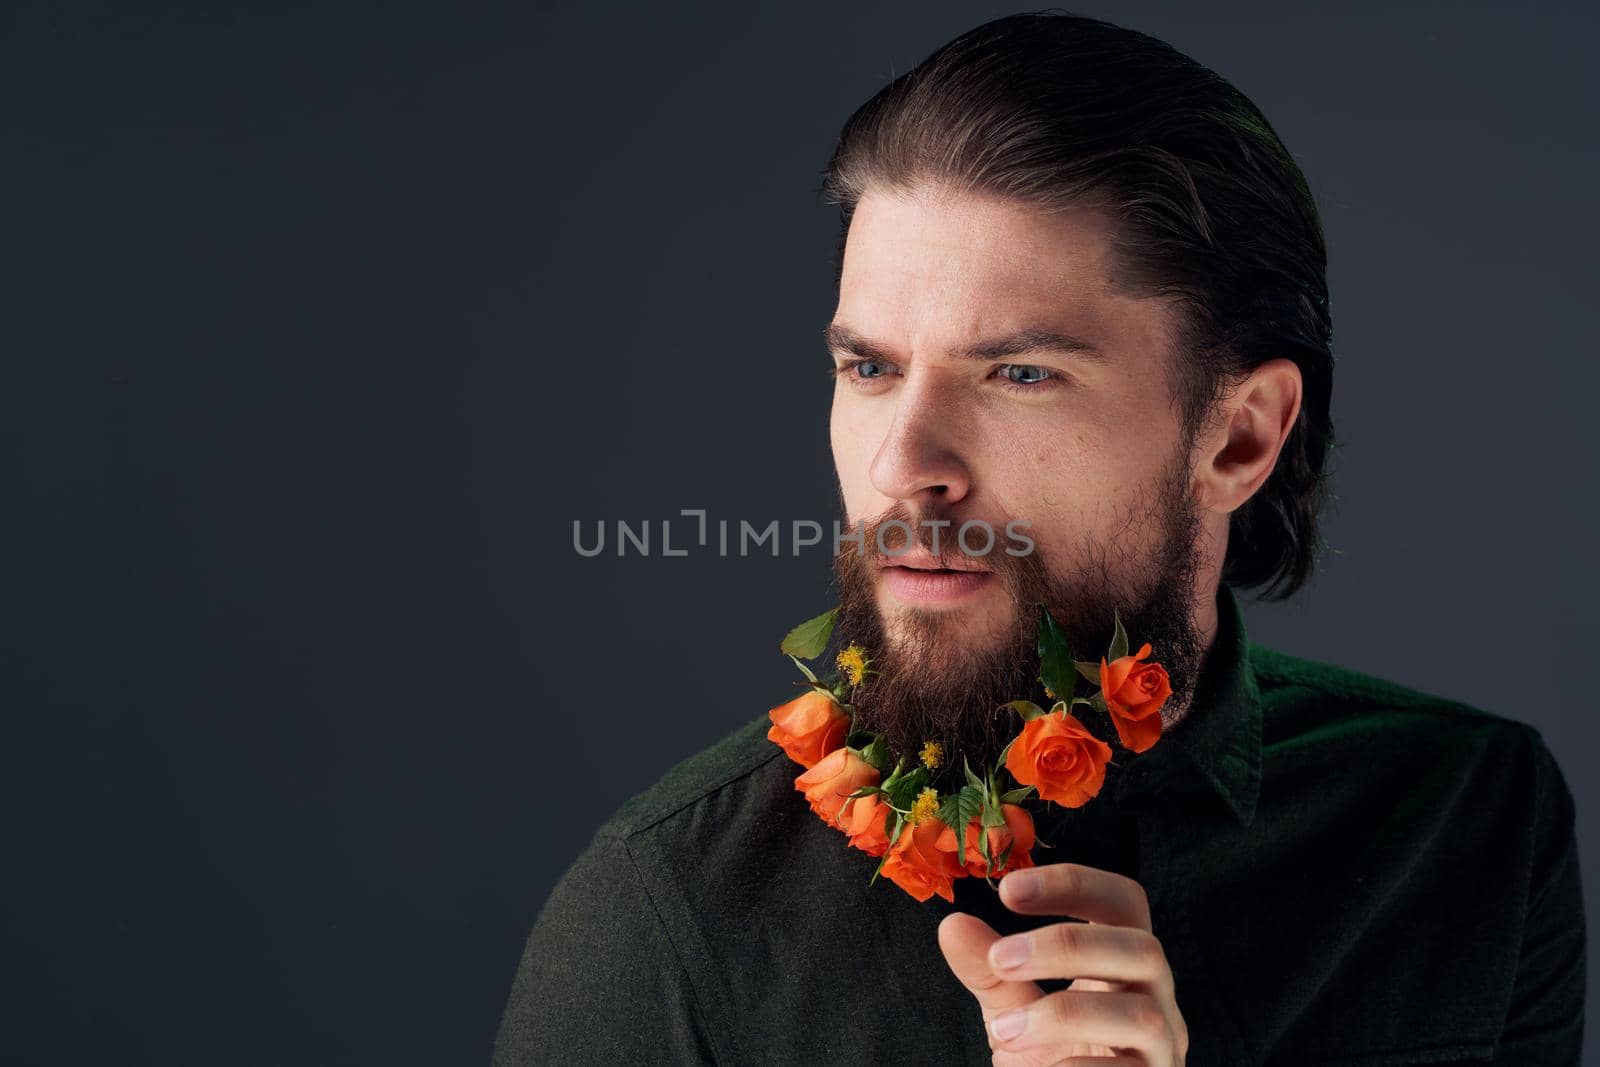 Cute man flowers in beard ornaments elegant style close-up by SHOTPRIME